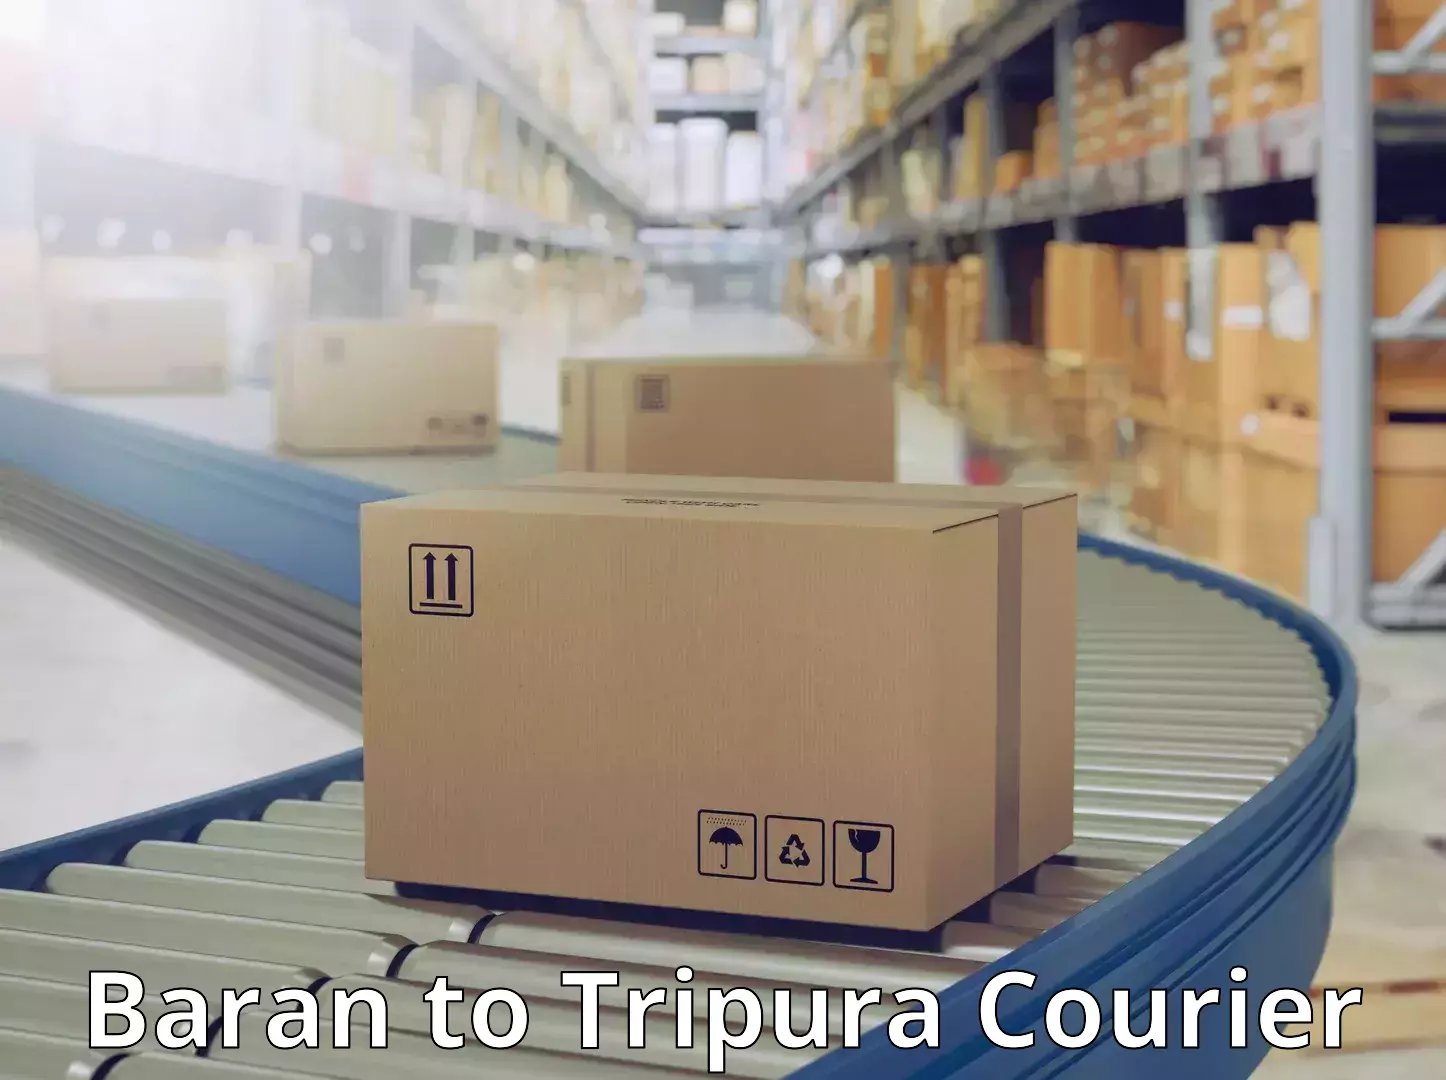 Reliable courier service Baran to Tripura